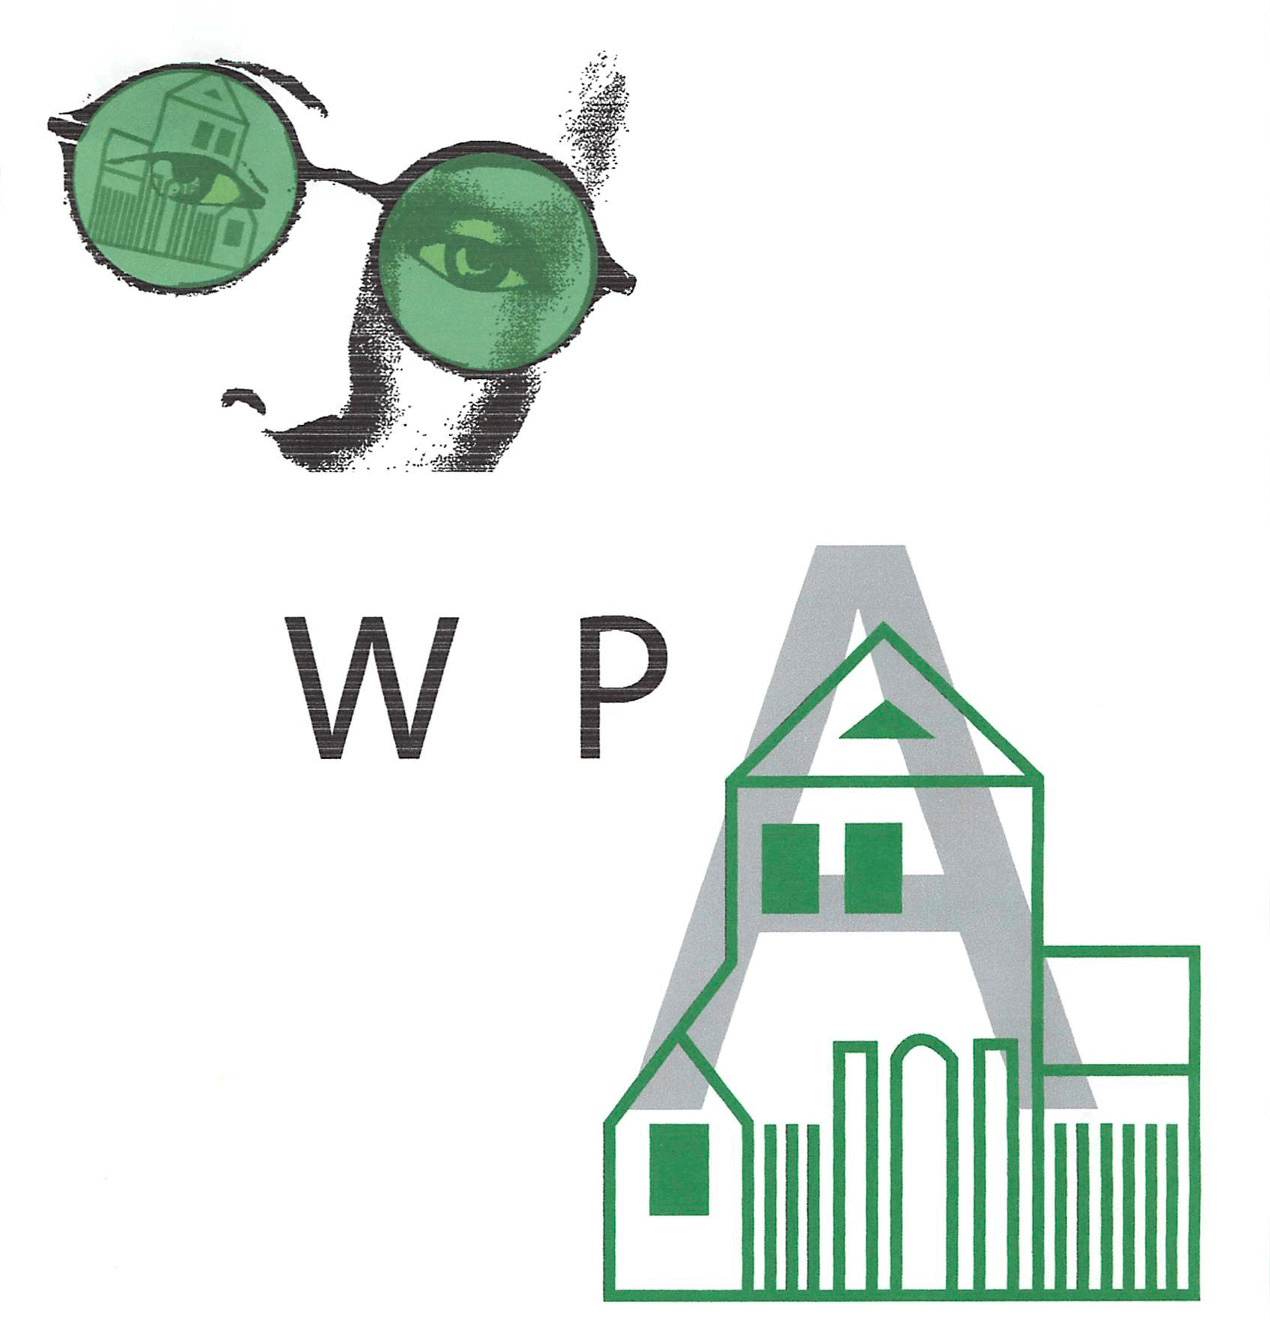 Figure 11. Administration as a Design Art. A collage shows the face of a person wearing classes. In one lens, a building, representing an institution, is reflected (outlined). The center of the collage has the letters WPA, an acronym for Writing Program Administrator. In the lower right, the A is set with a larger typeface and integrated with an outline of a building--the same building reflected in the lens of the human figure at the top of the collage.